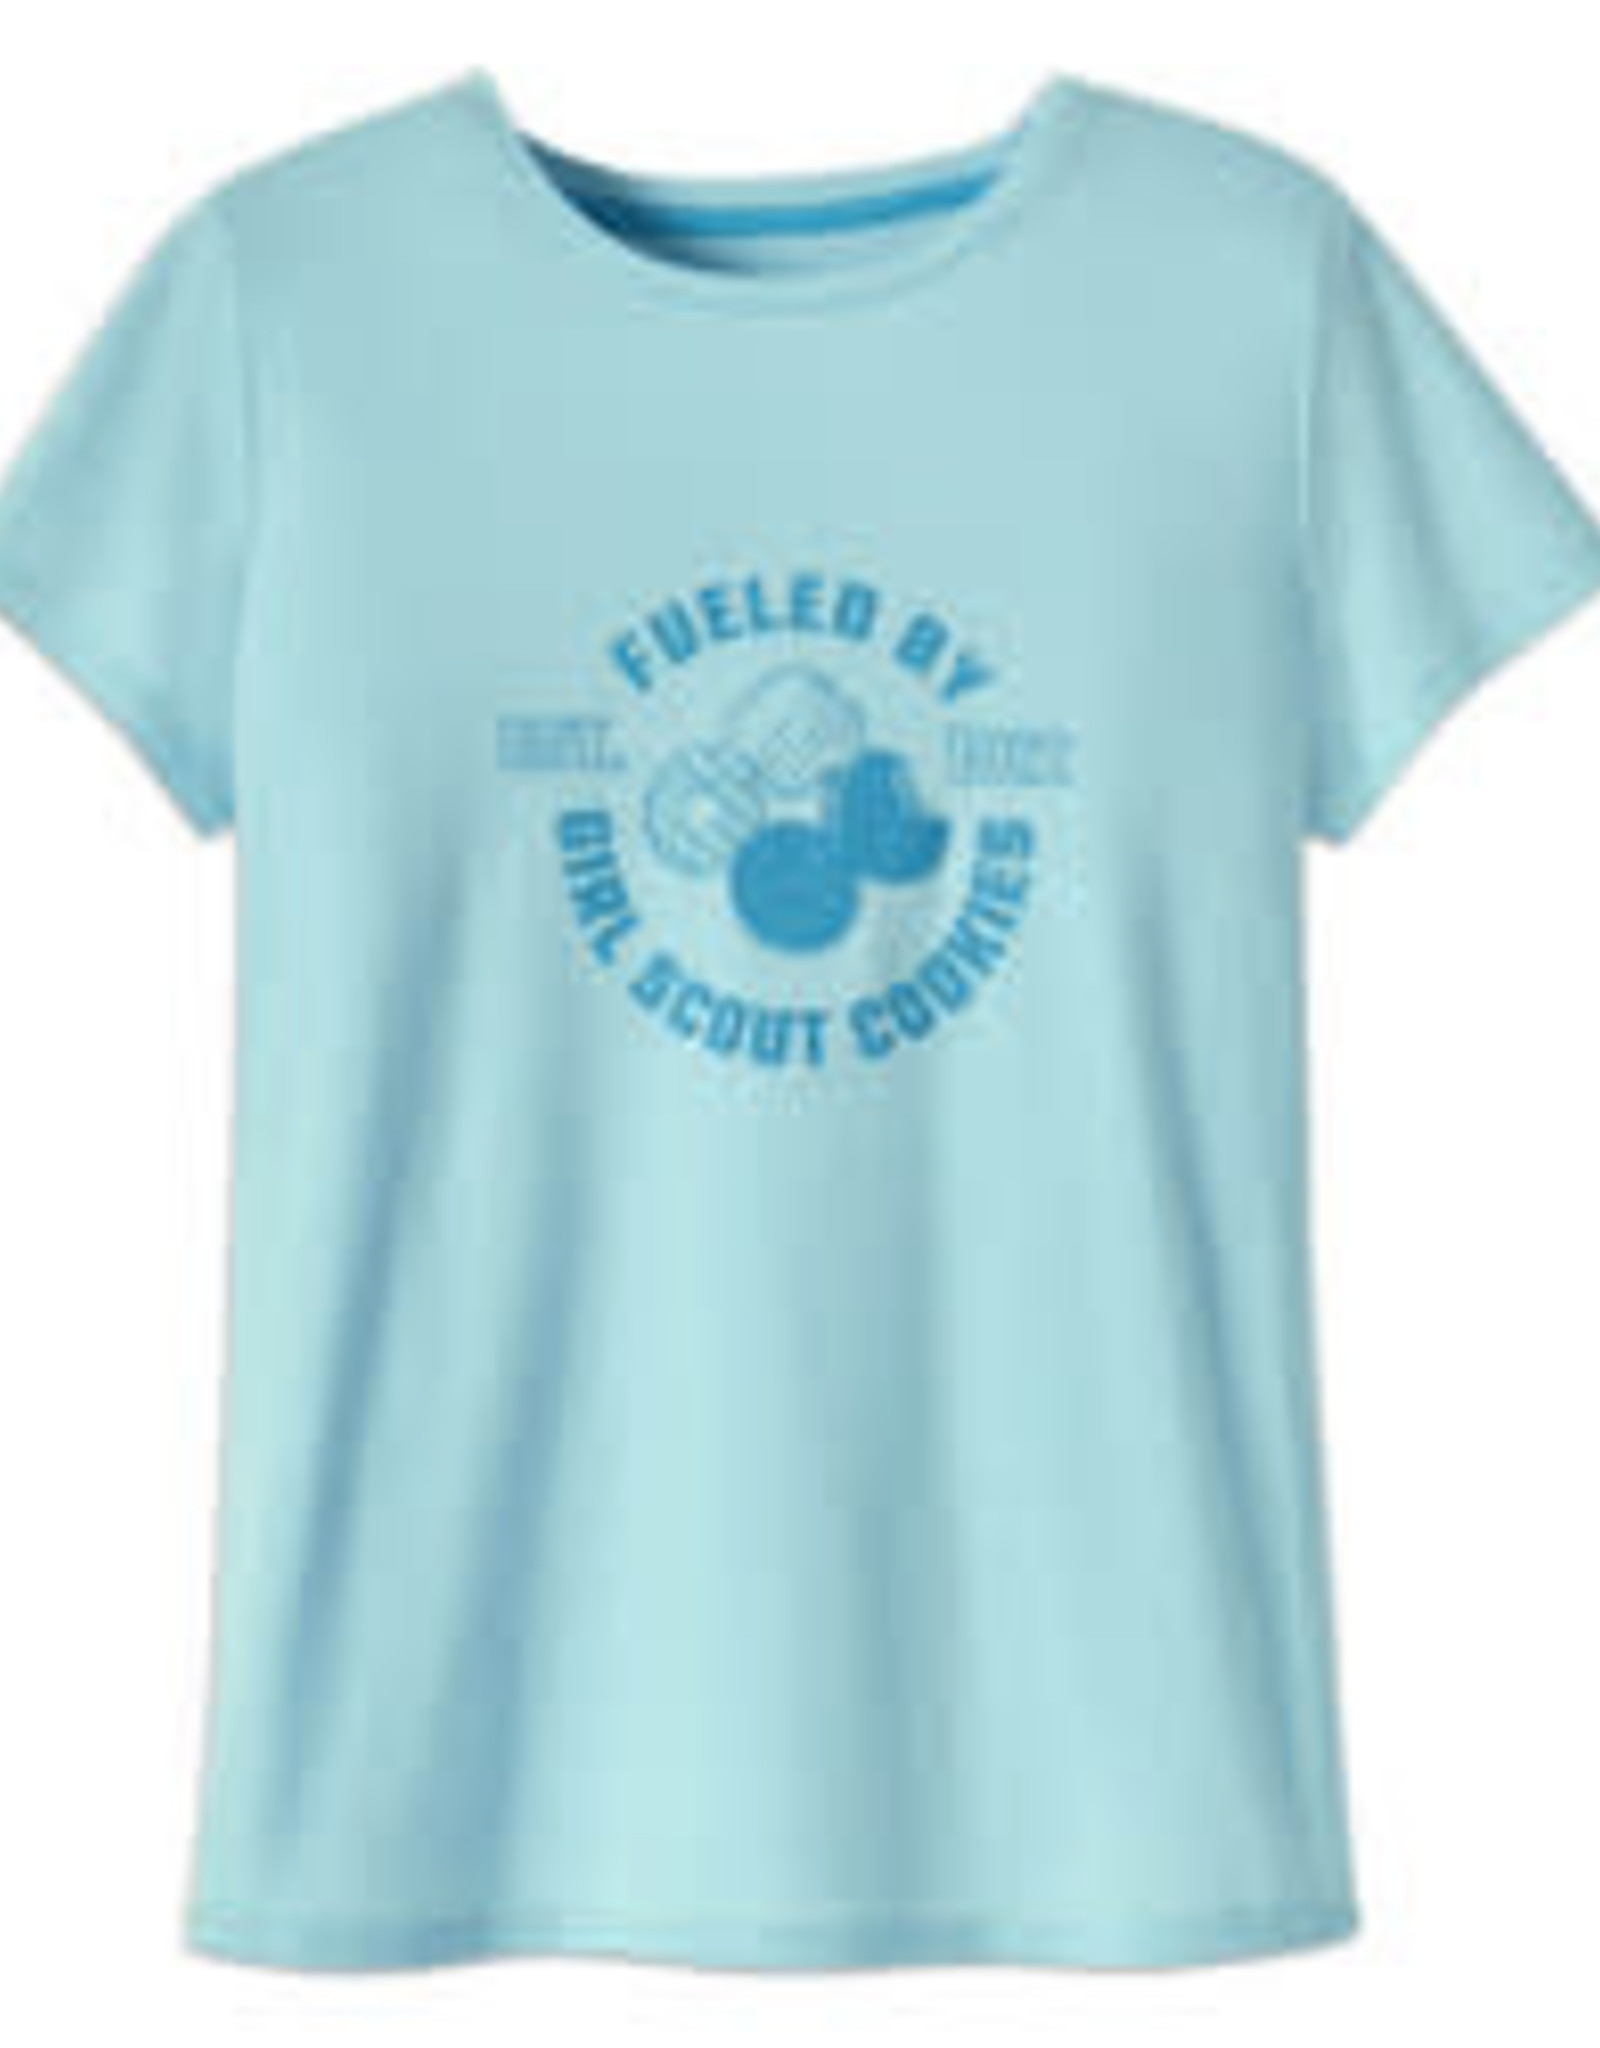 Blue Fueled by Cookies T-Shirt Women's